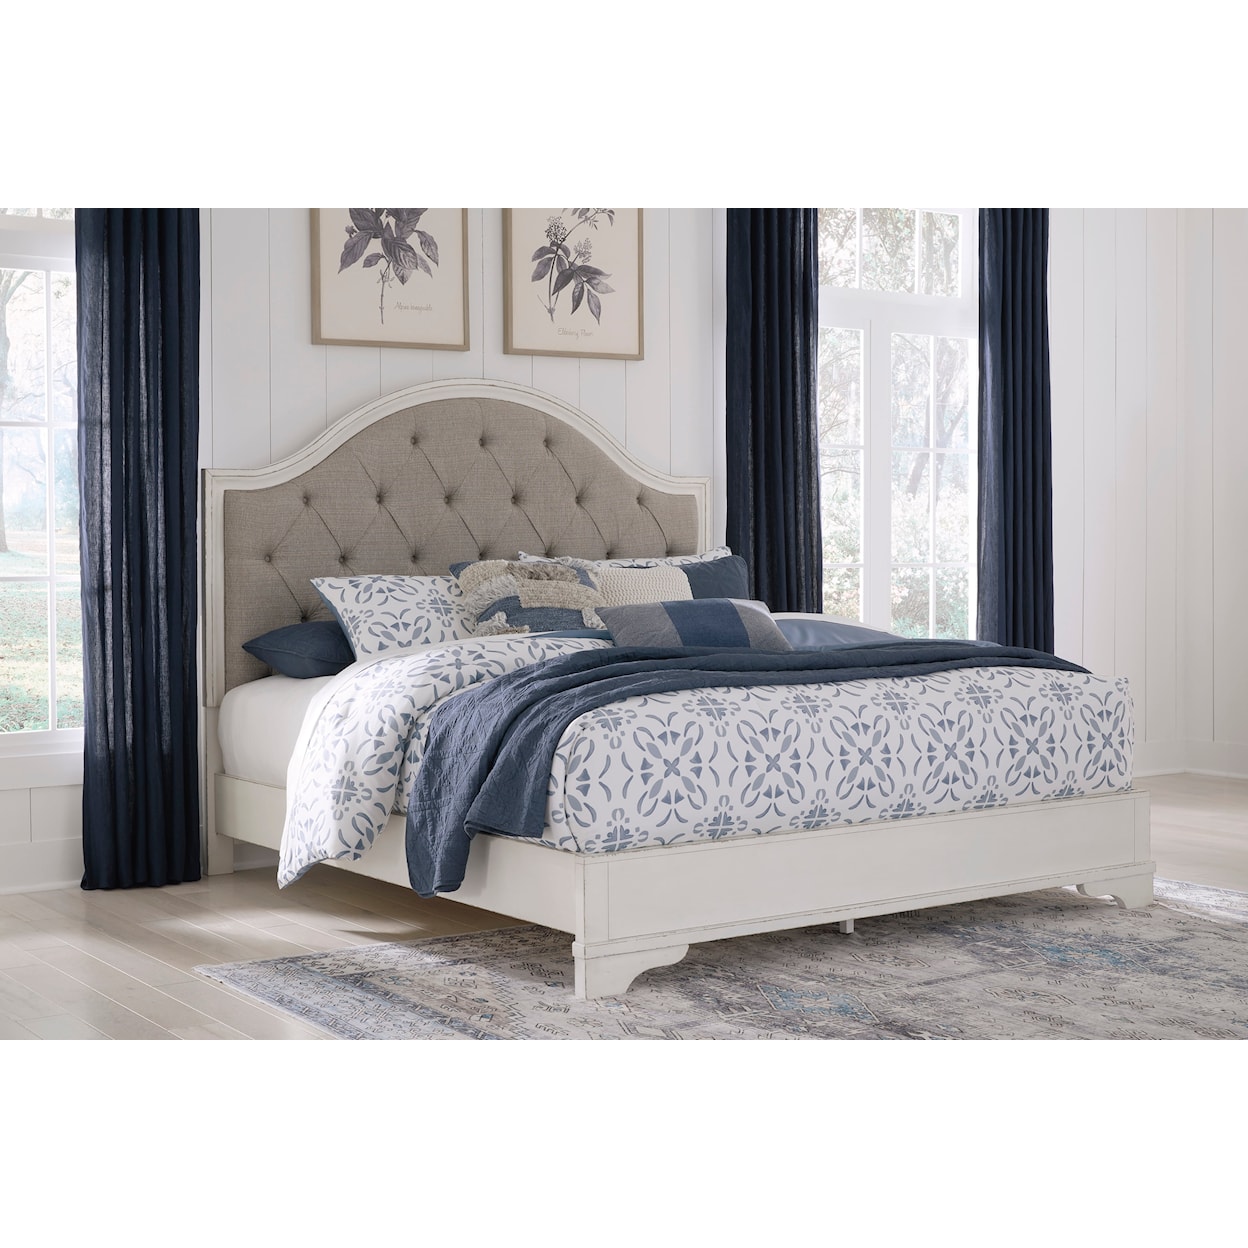 Signature Design by Ashley Brollyn California King Bed